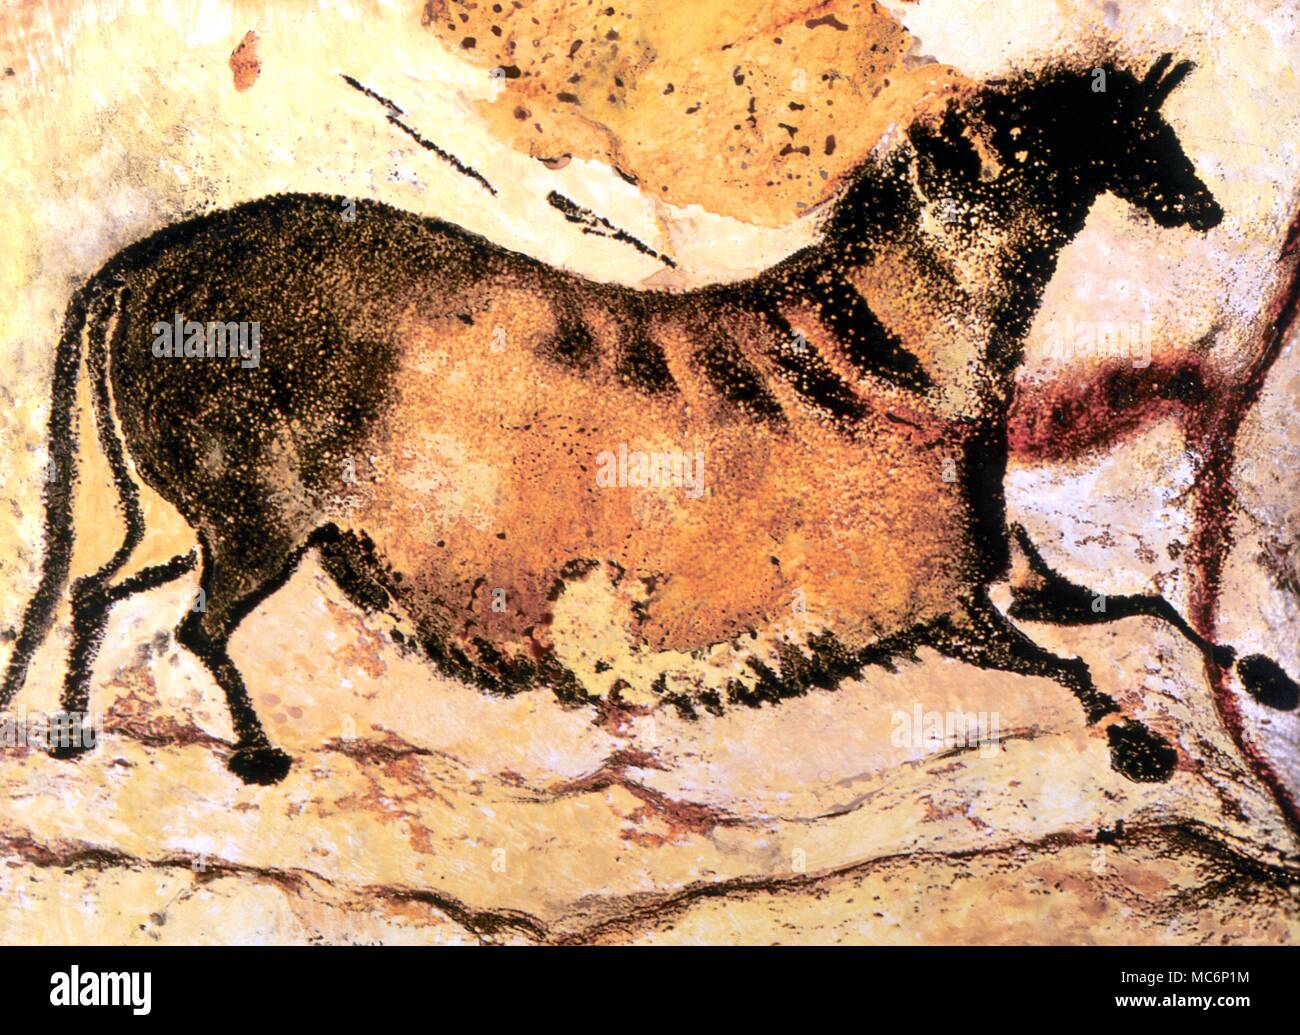 Cave Art - Lascaux - Prehistoric cave painting of running horse, from the cave system of Lascaux (Axial Gallery). Computer/artwork graphic by James Thorn. Copyright CWC - Â® / Charles Walker Stock Photo